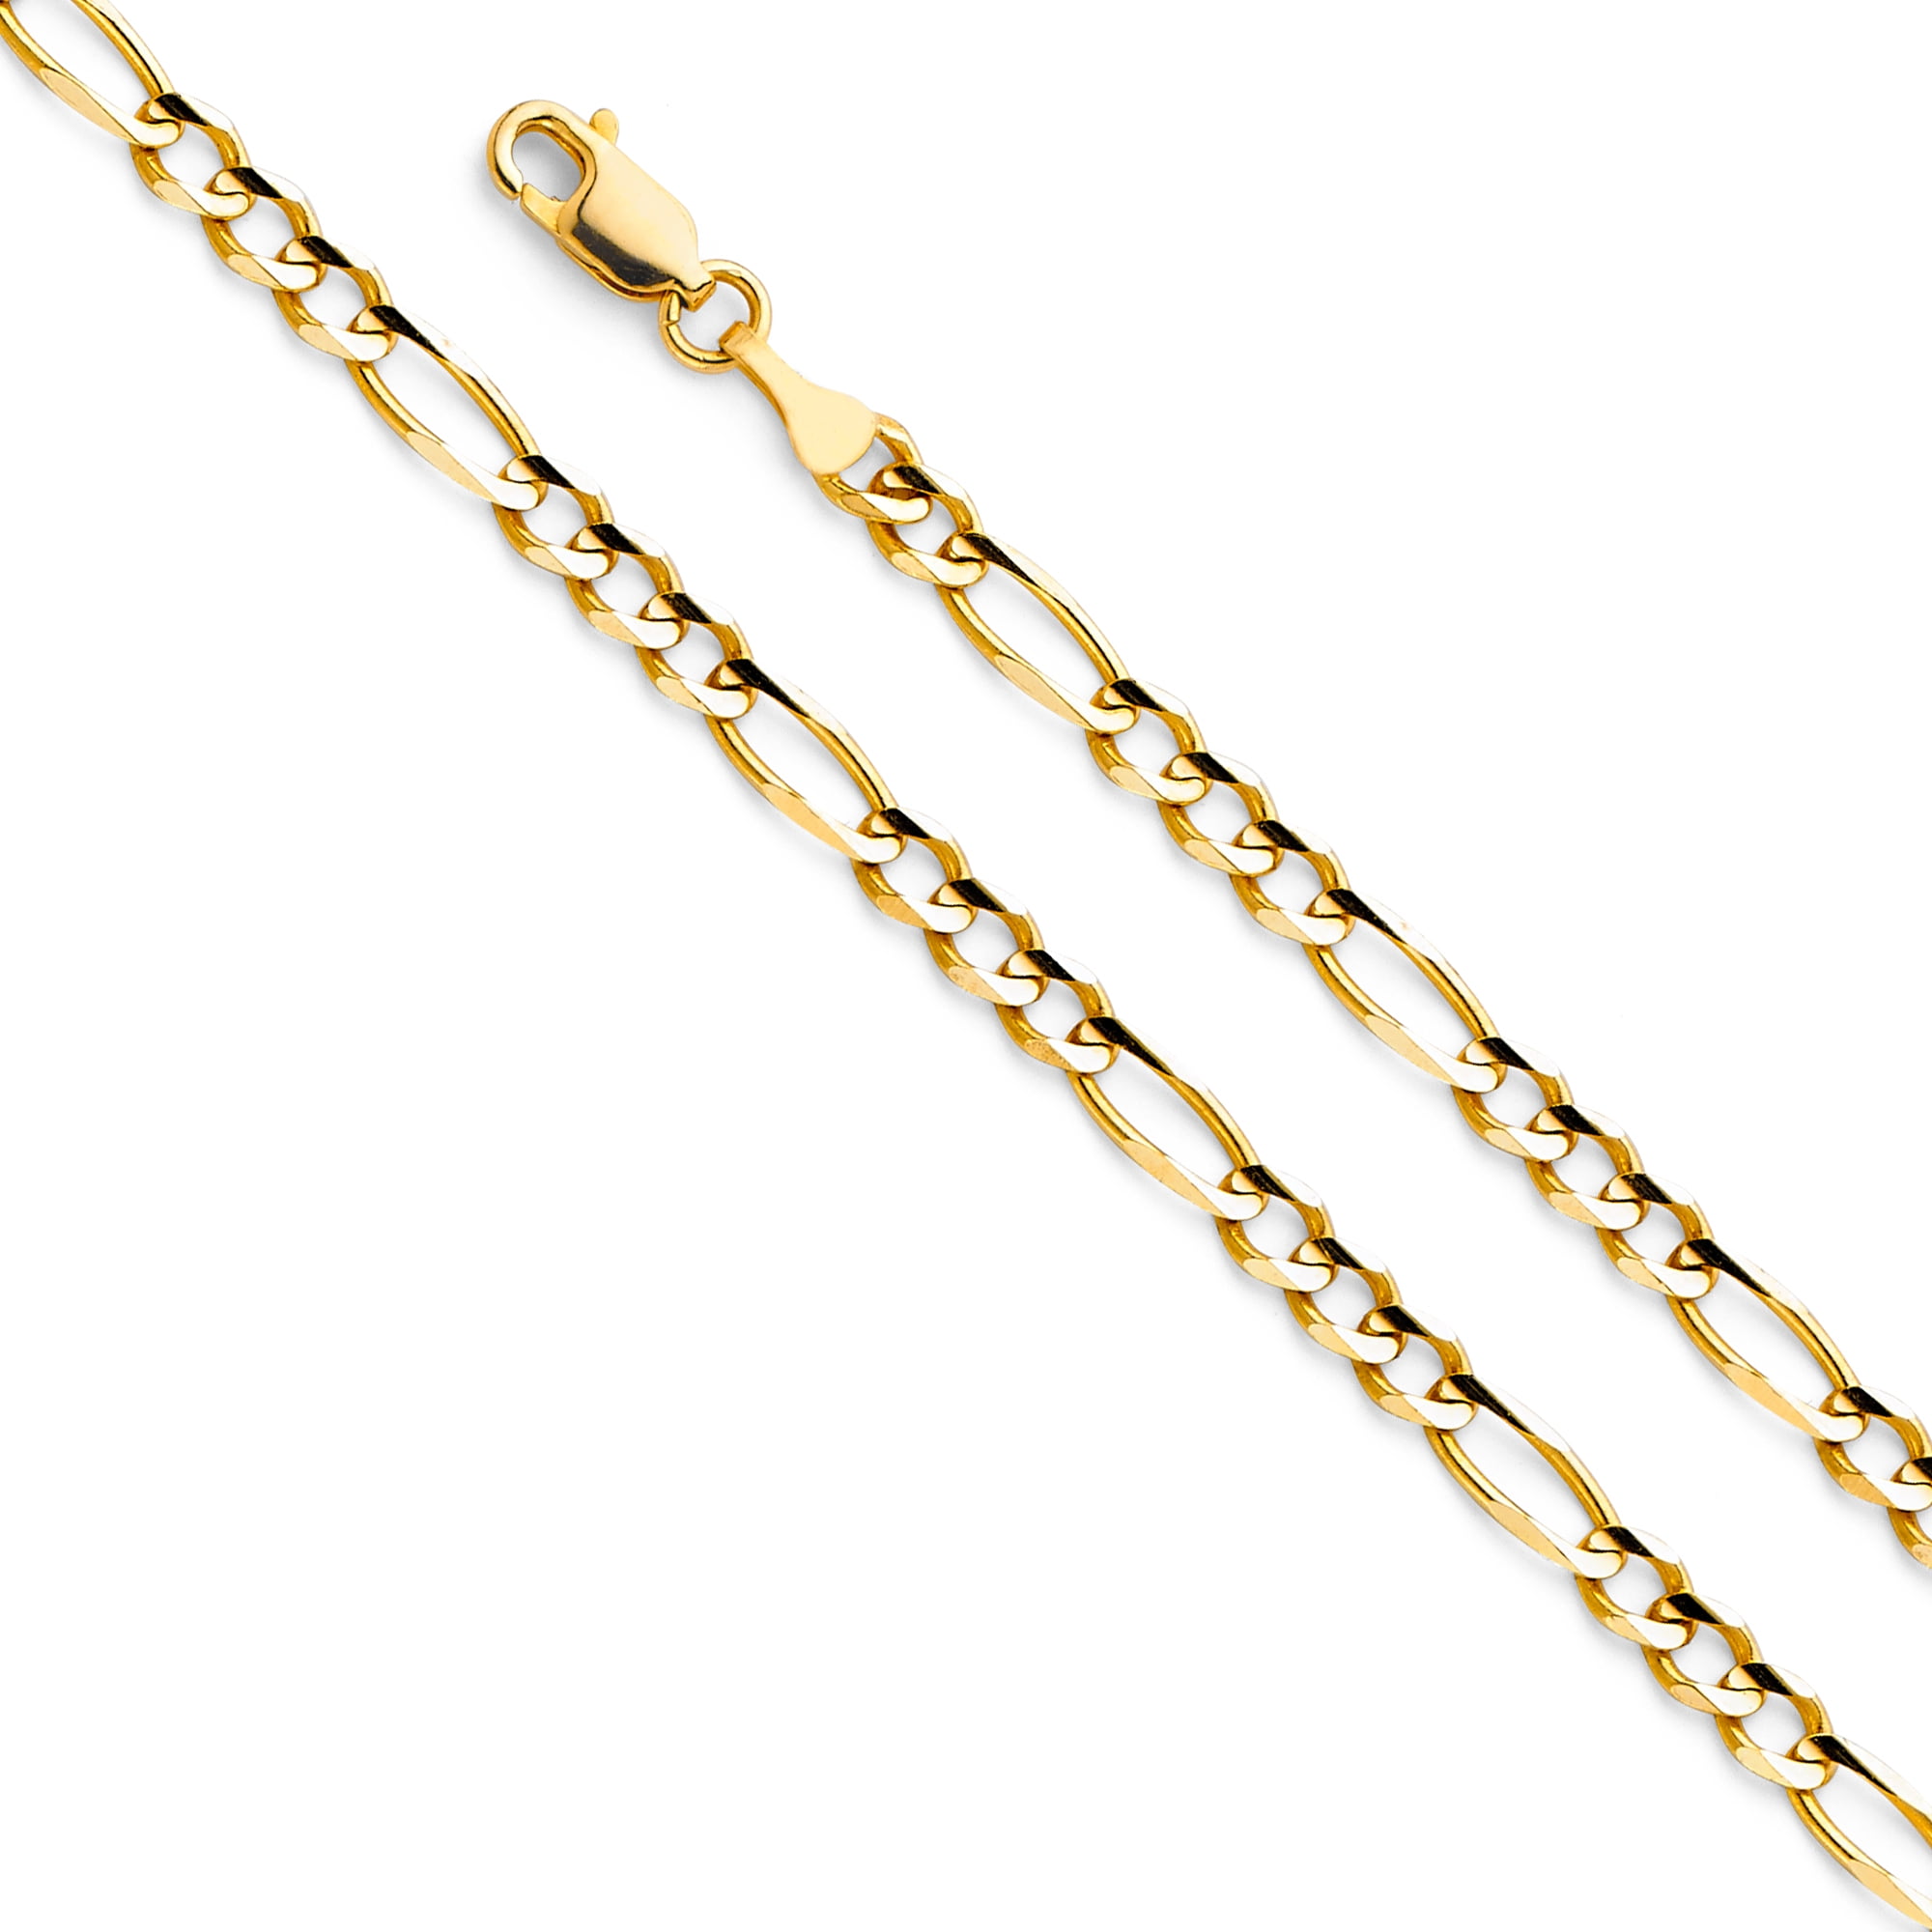 Jewels By Lux 14K Yellow Gold 4mm Concave Open Figaro Chain